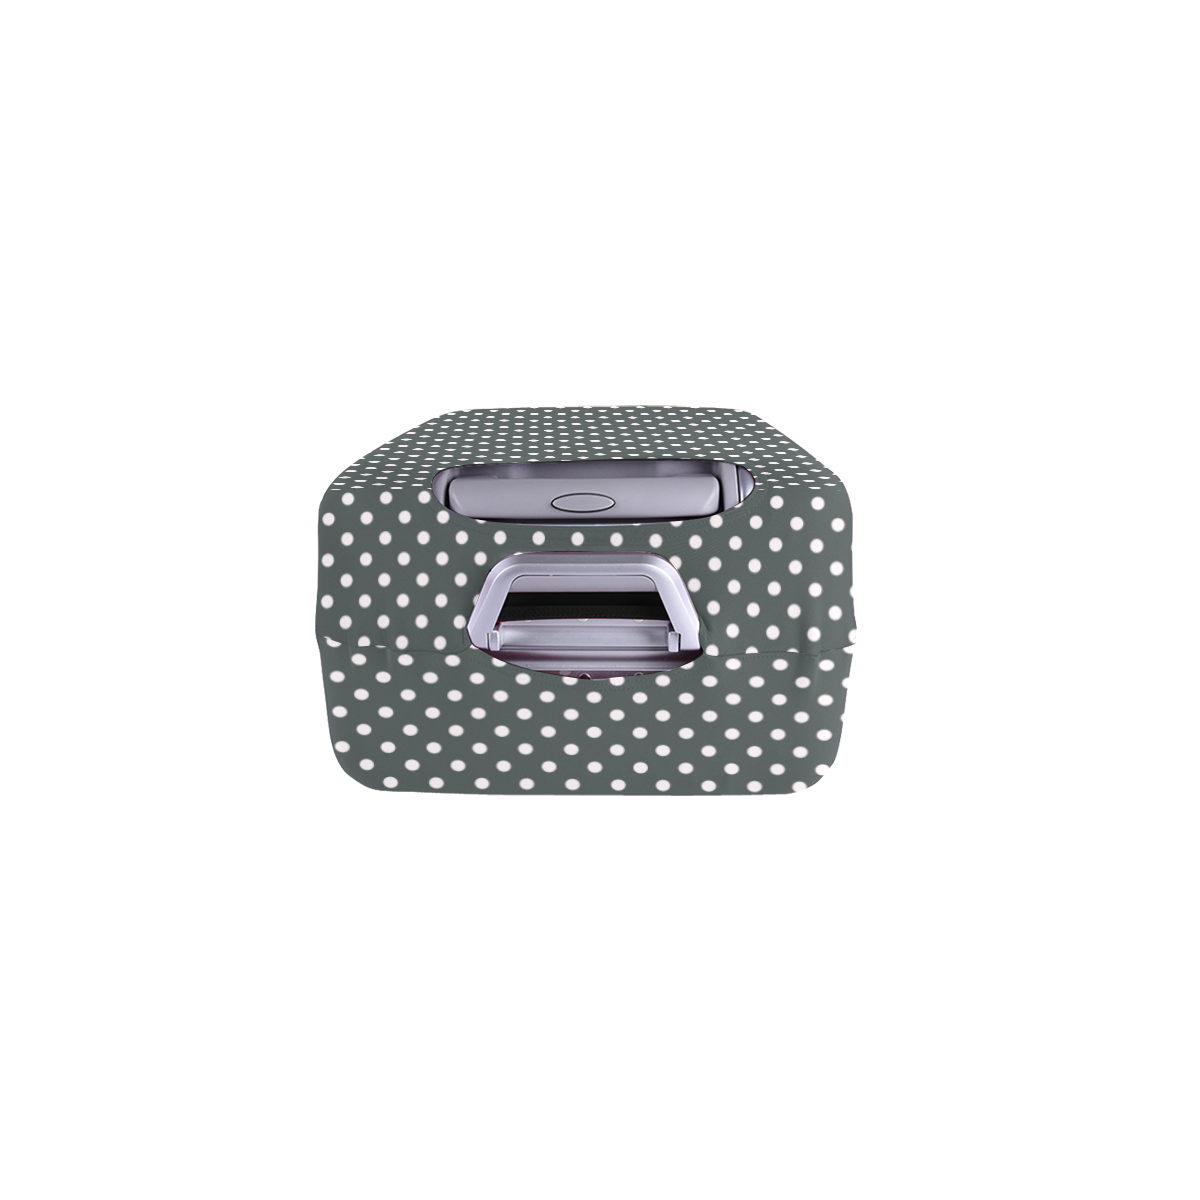 Silver polka dots Luggage Cover/Small 18"-21"